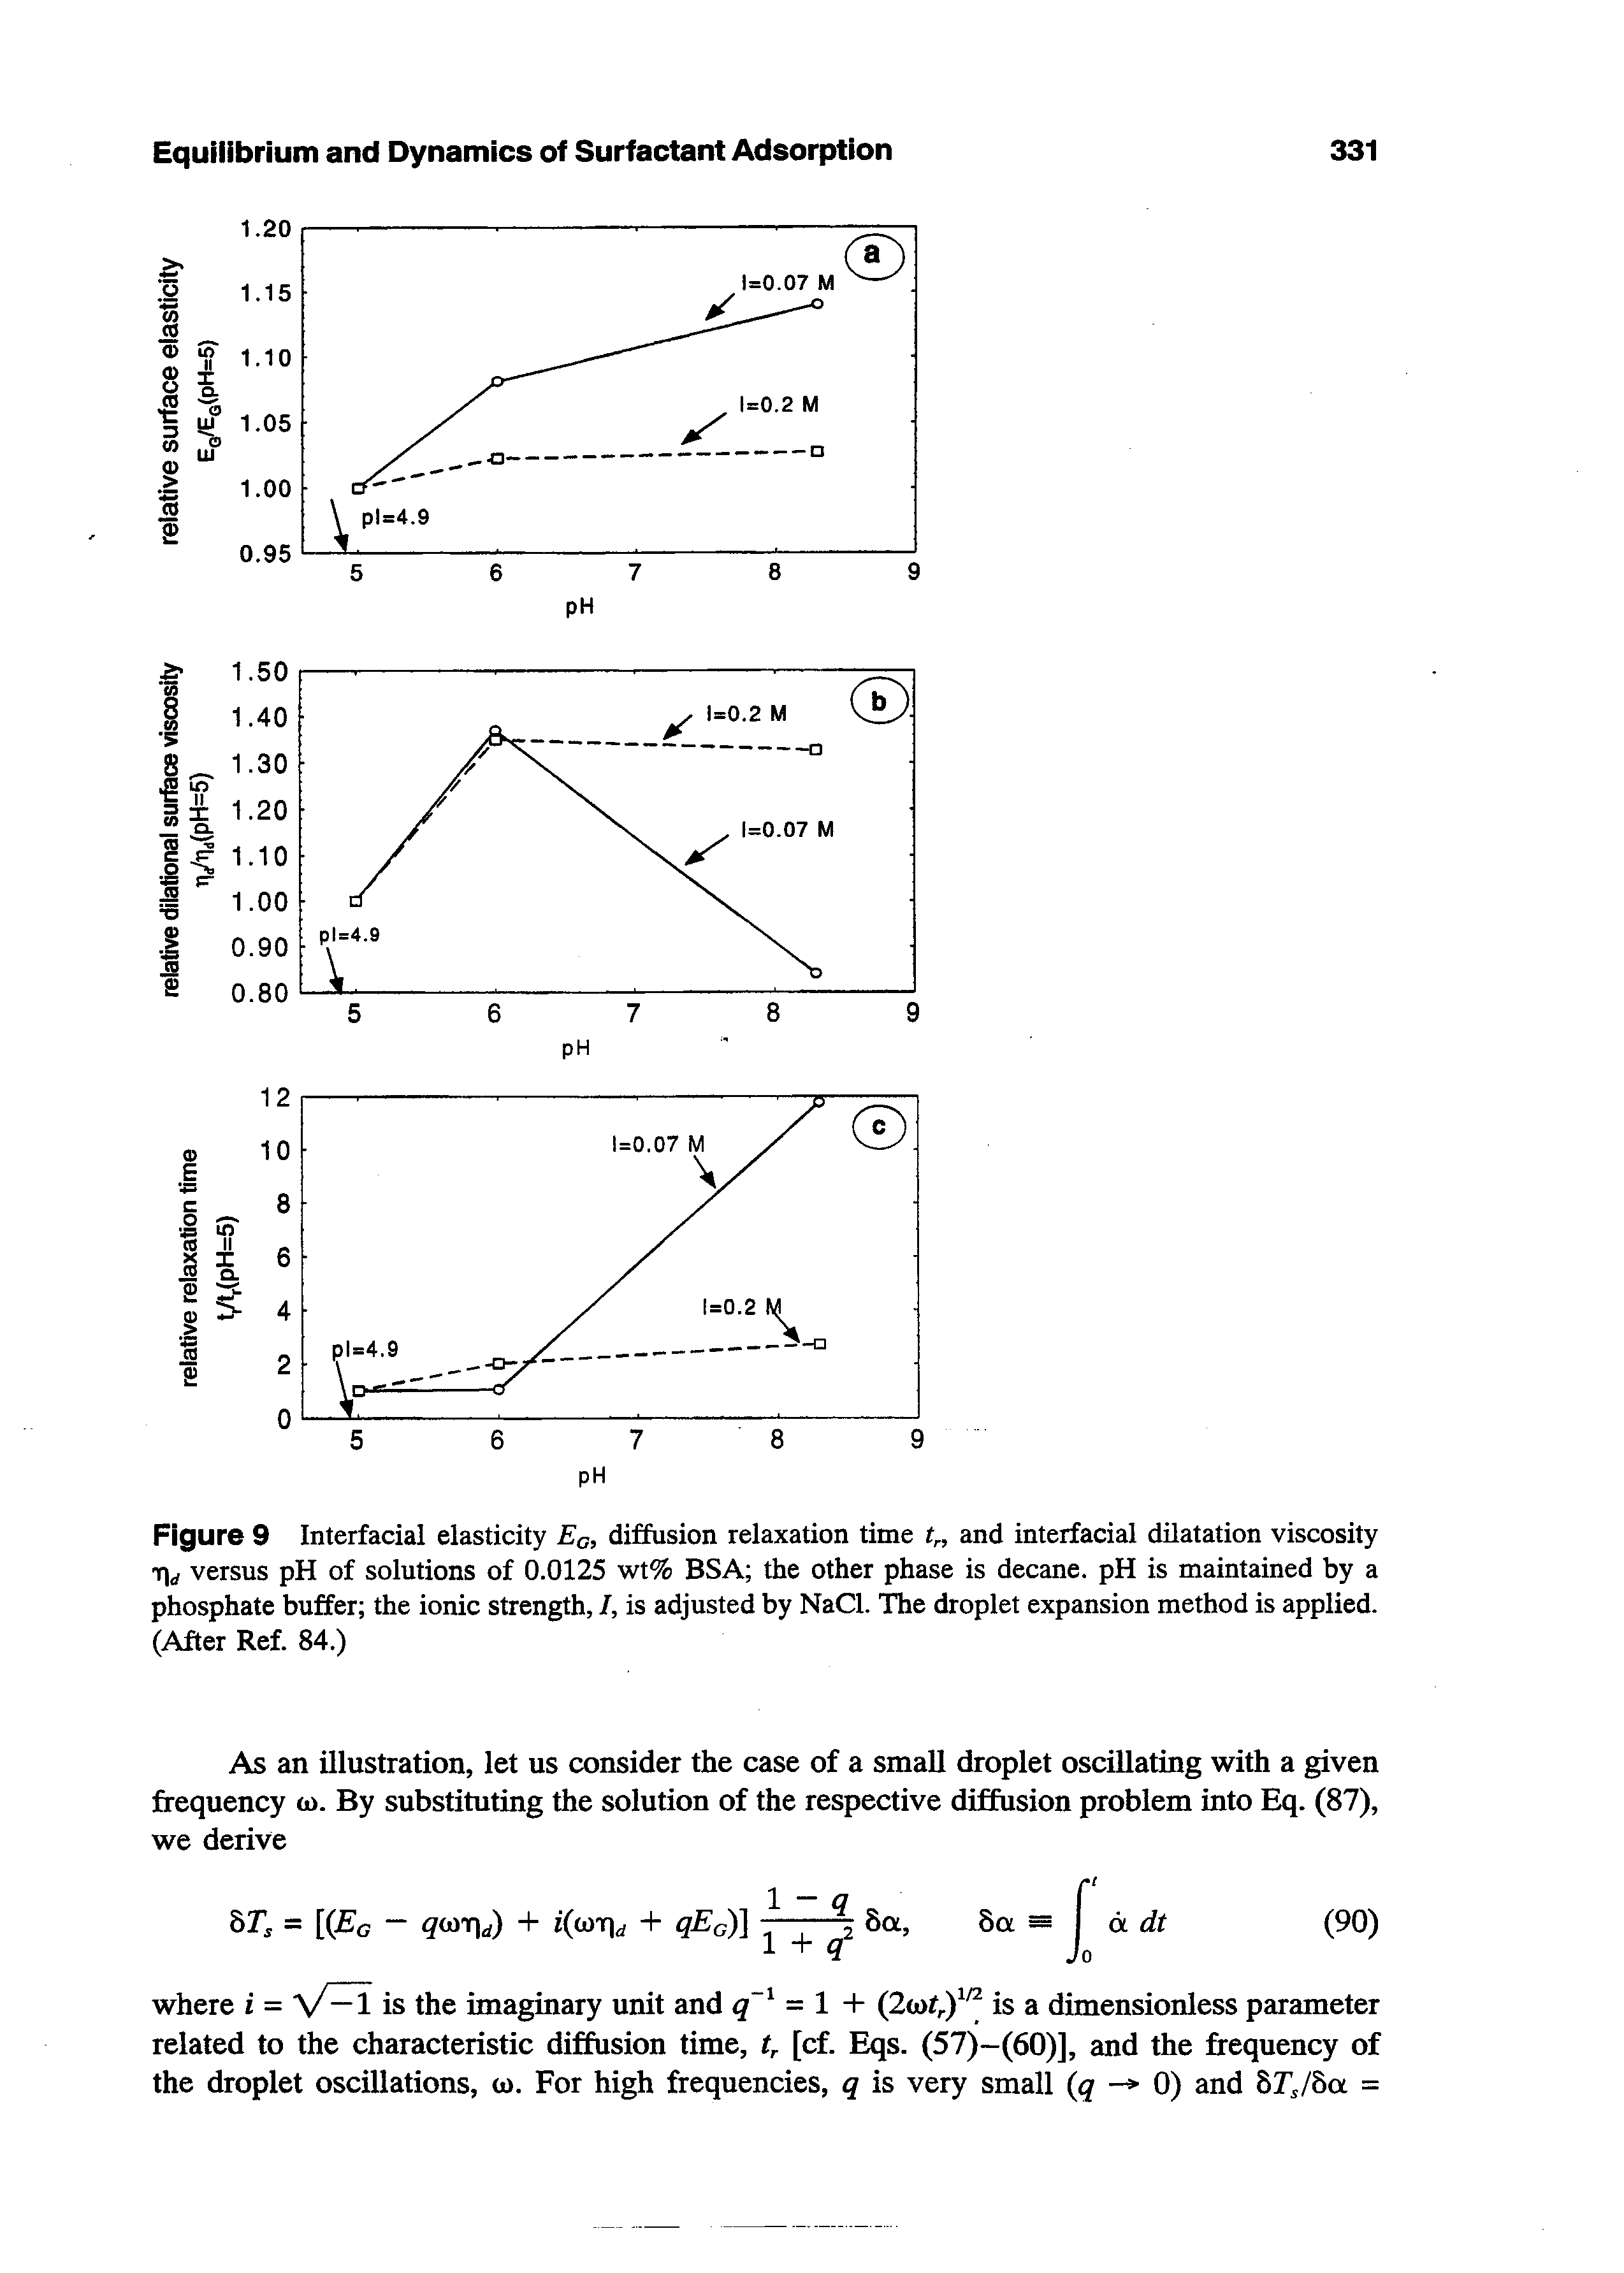 Figure 9 Interfacial elasticity Eq, diffusion relaxation time t and interfacial dilatation viscosity T rf versus pH of solutions of 0.0125 wt% BSA the other phase is decane. pH is maintained by a phosphate buffer the ionic strength, I, is adjusted by NaCl. The droplet expansion method is applied. (After Ref. 84.)...